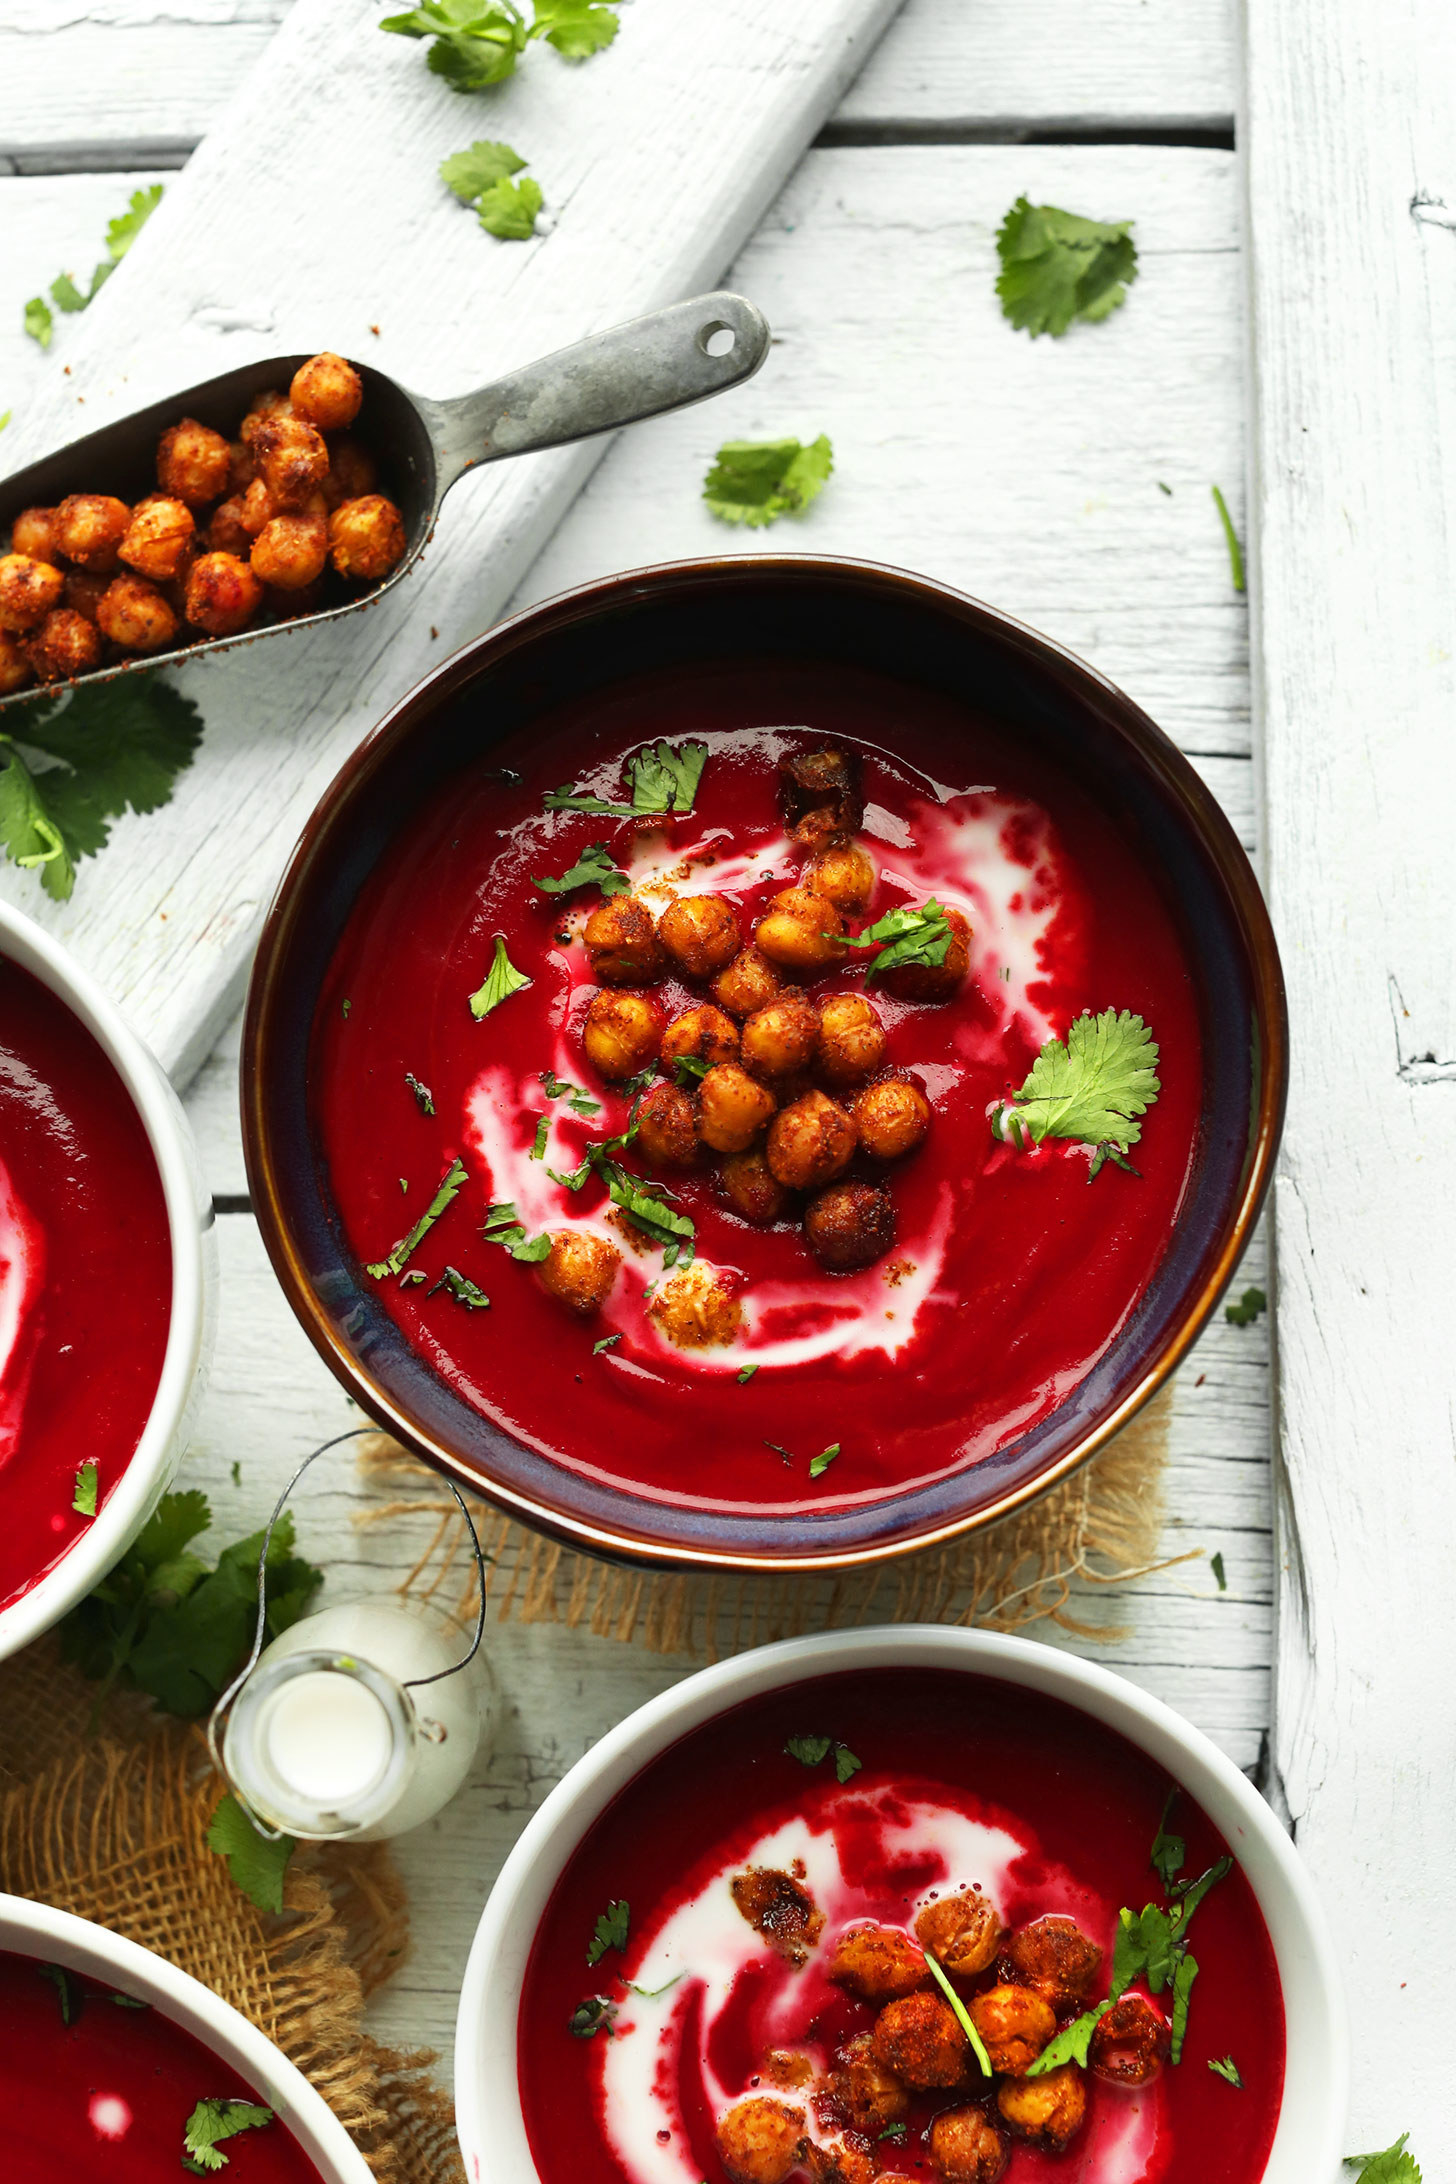 Curried beet soup with tandoori chickpeas